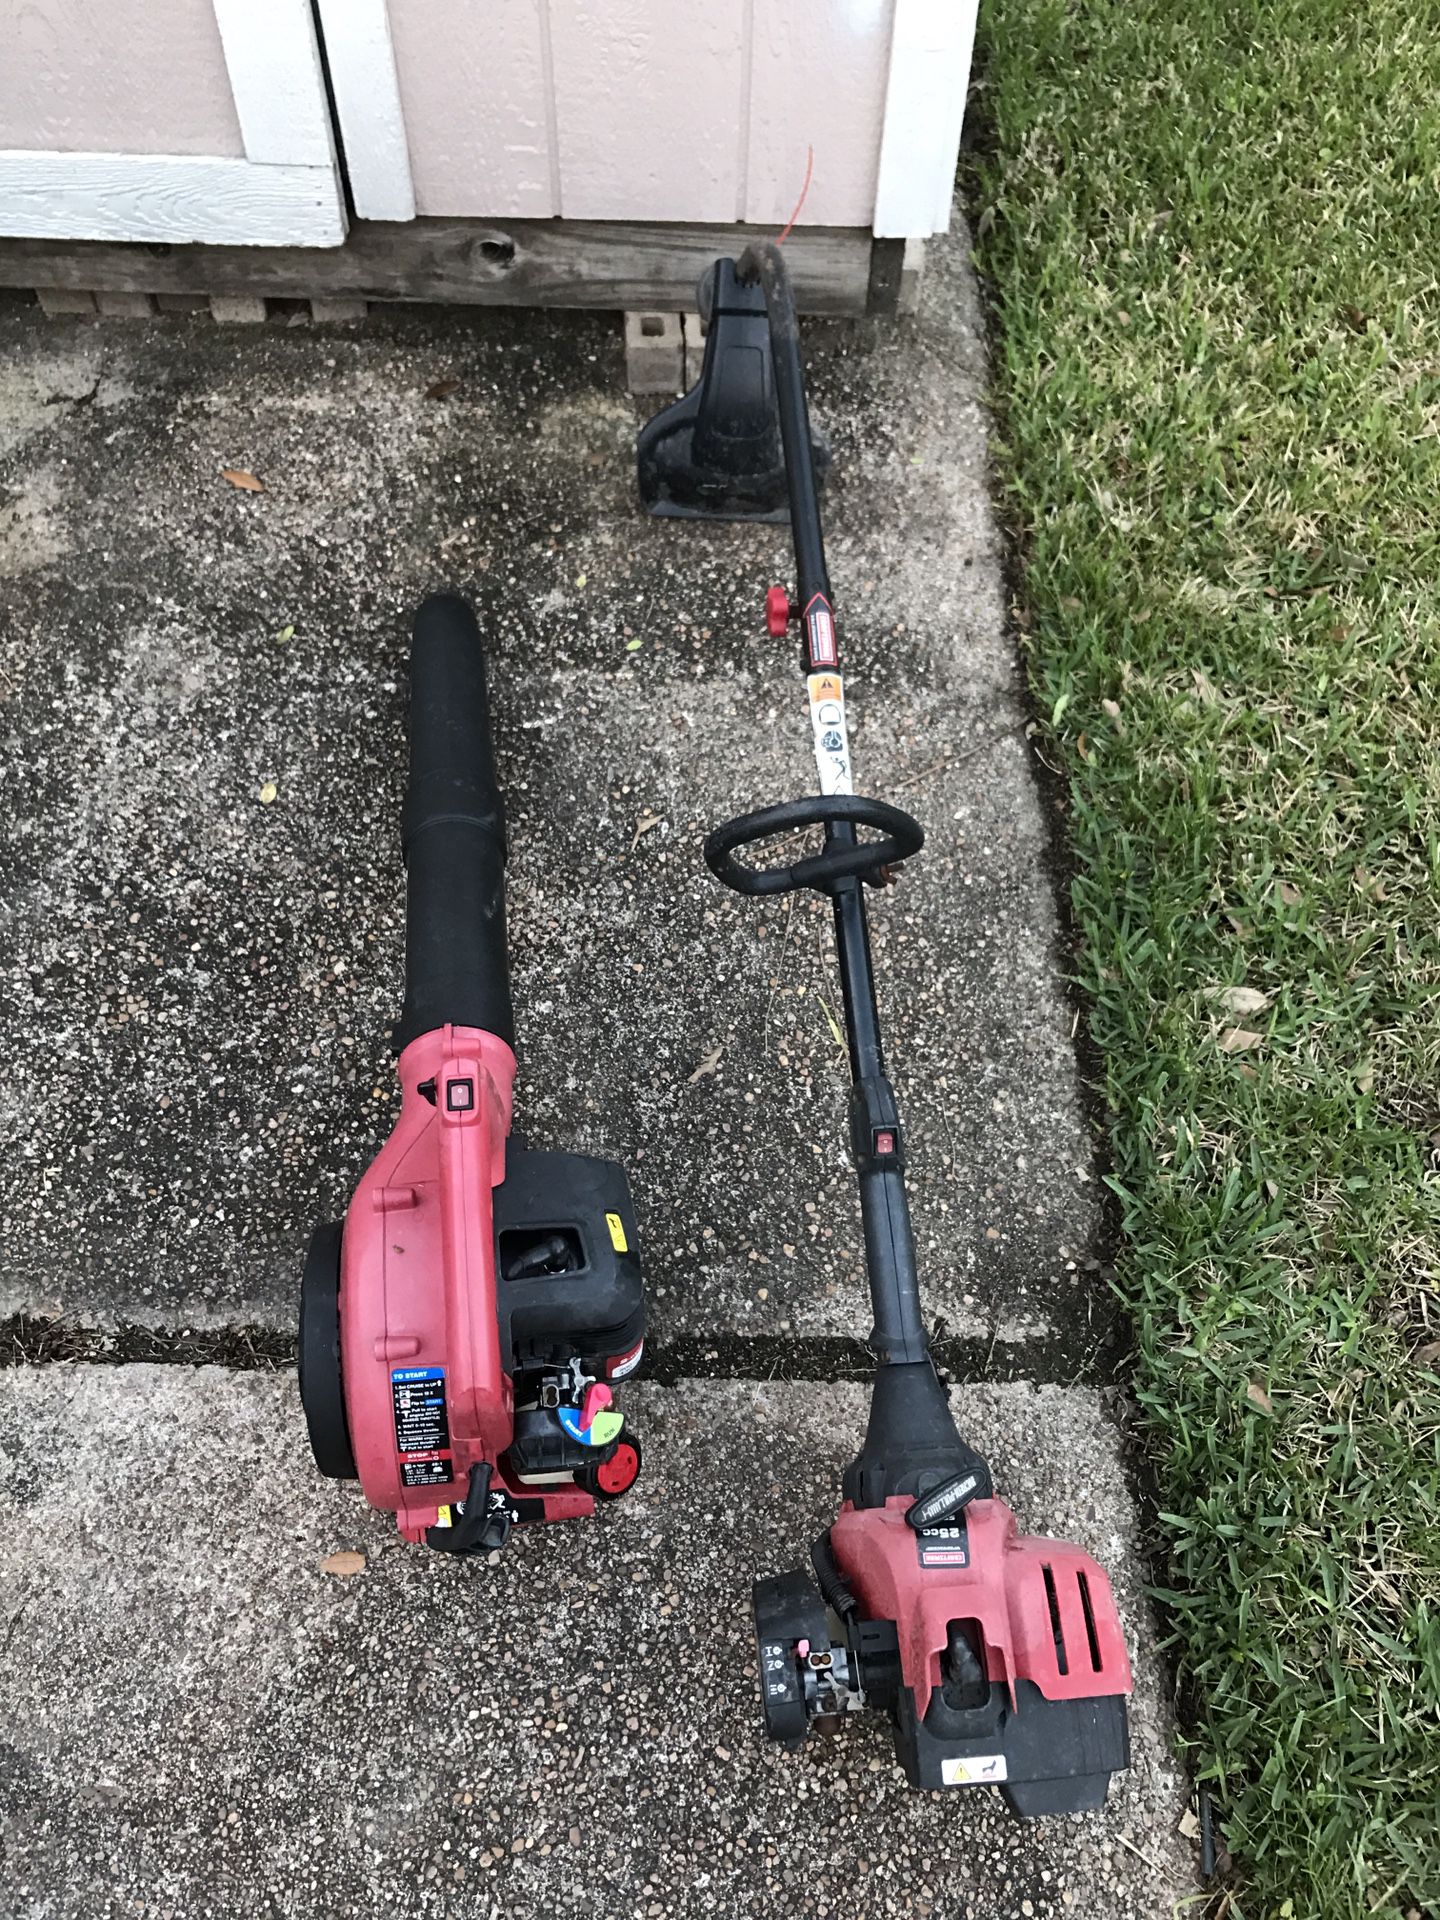 Leaf blower and weedeater both for $50